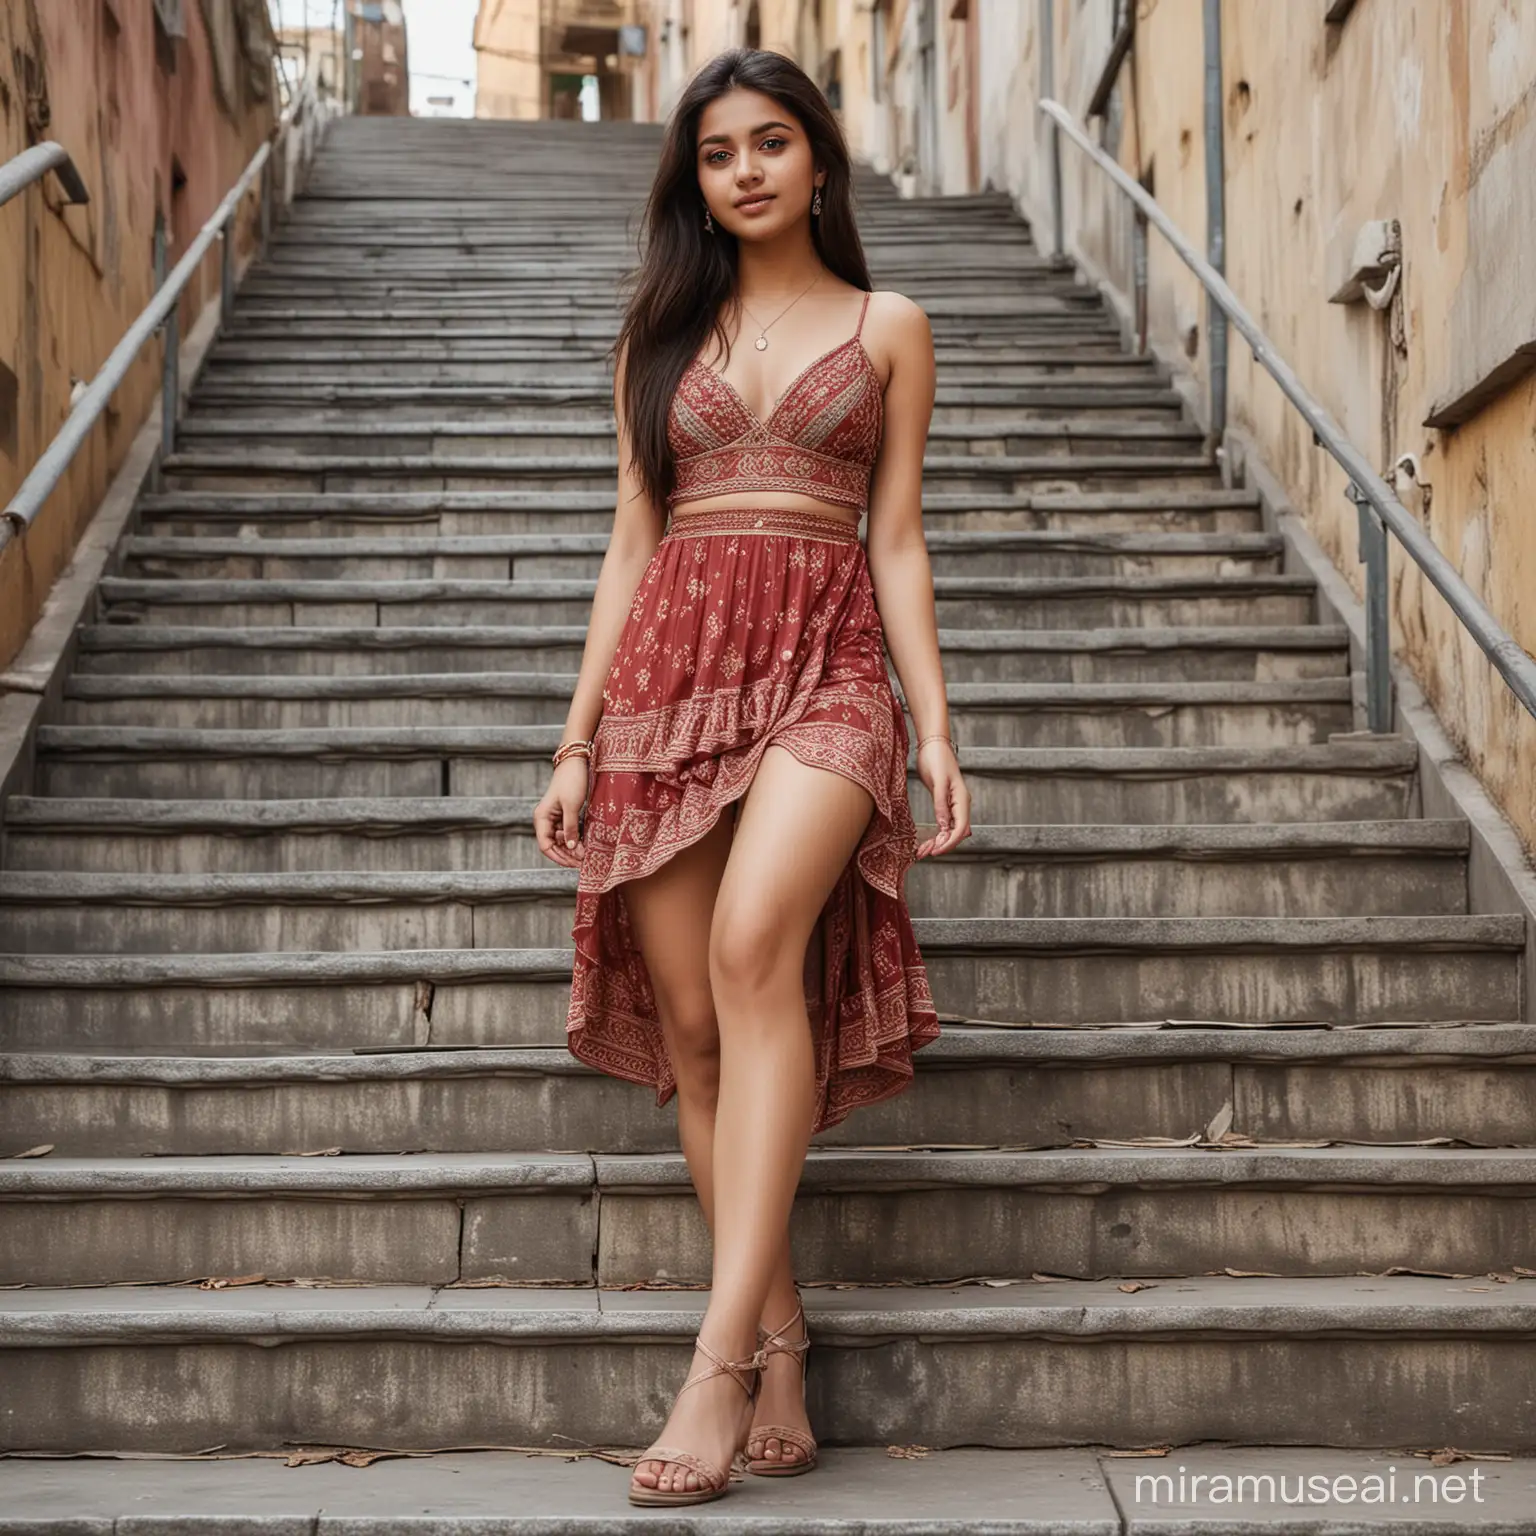 Aesthetic Fusion IndianRussian Girl on Staircase